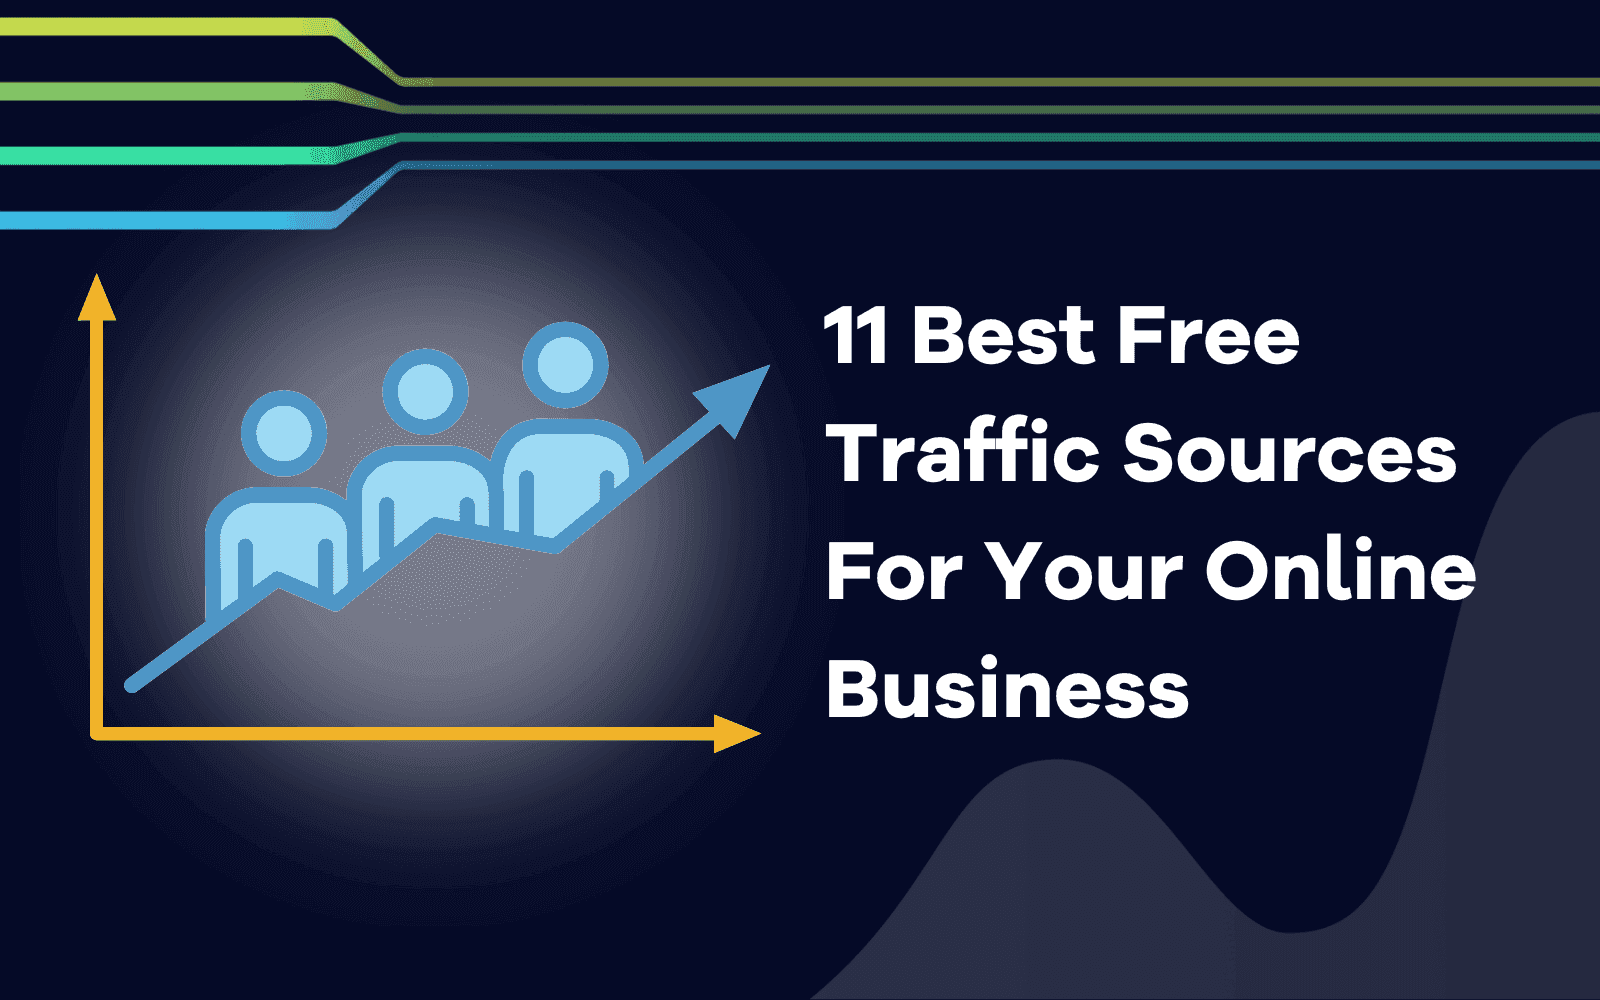 11 Best Free Traffic Sources For Your Online Business